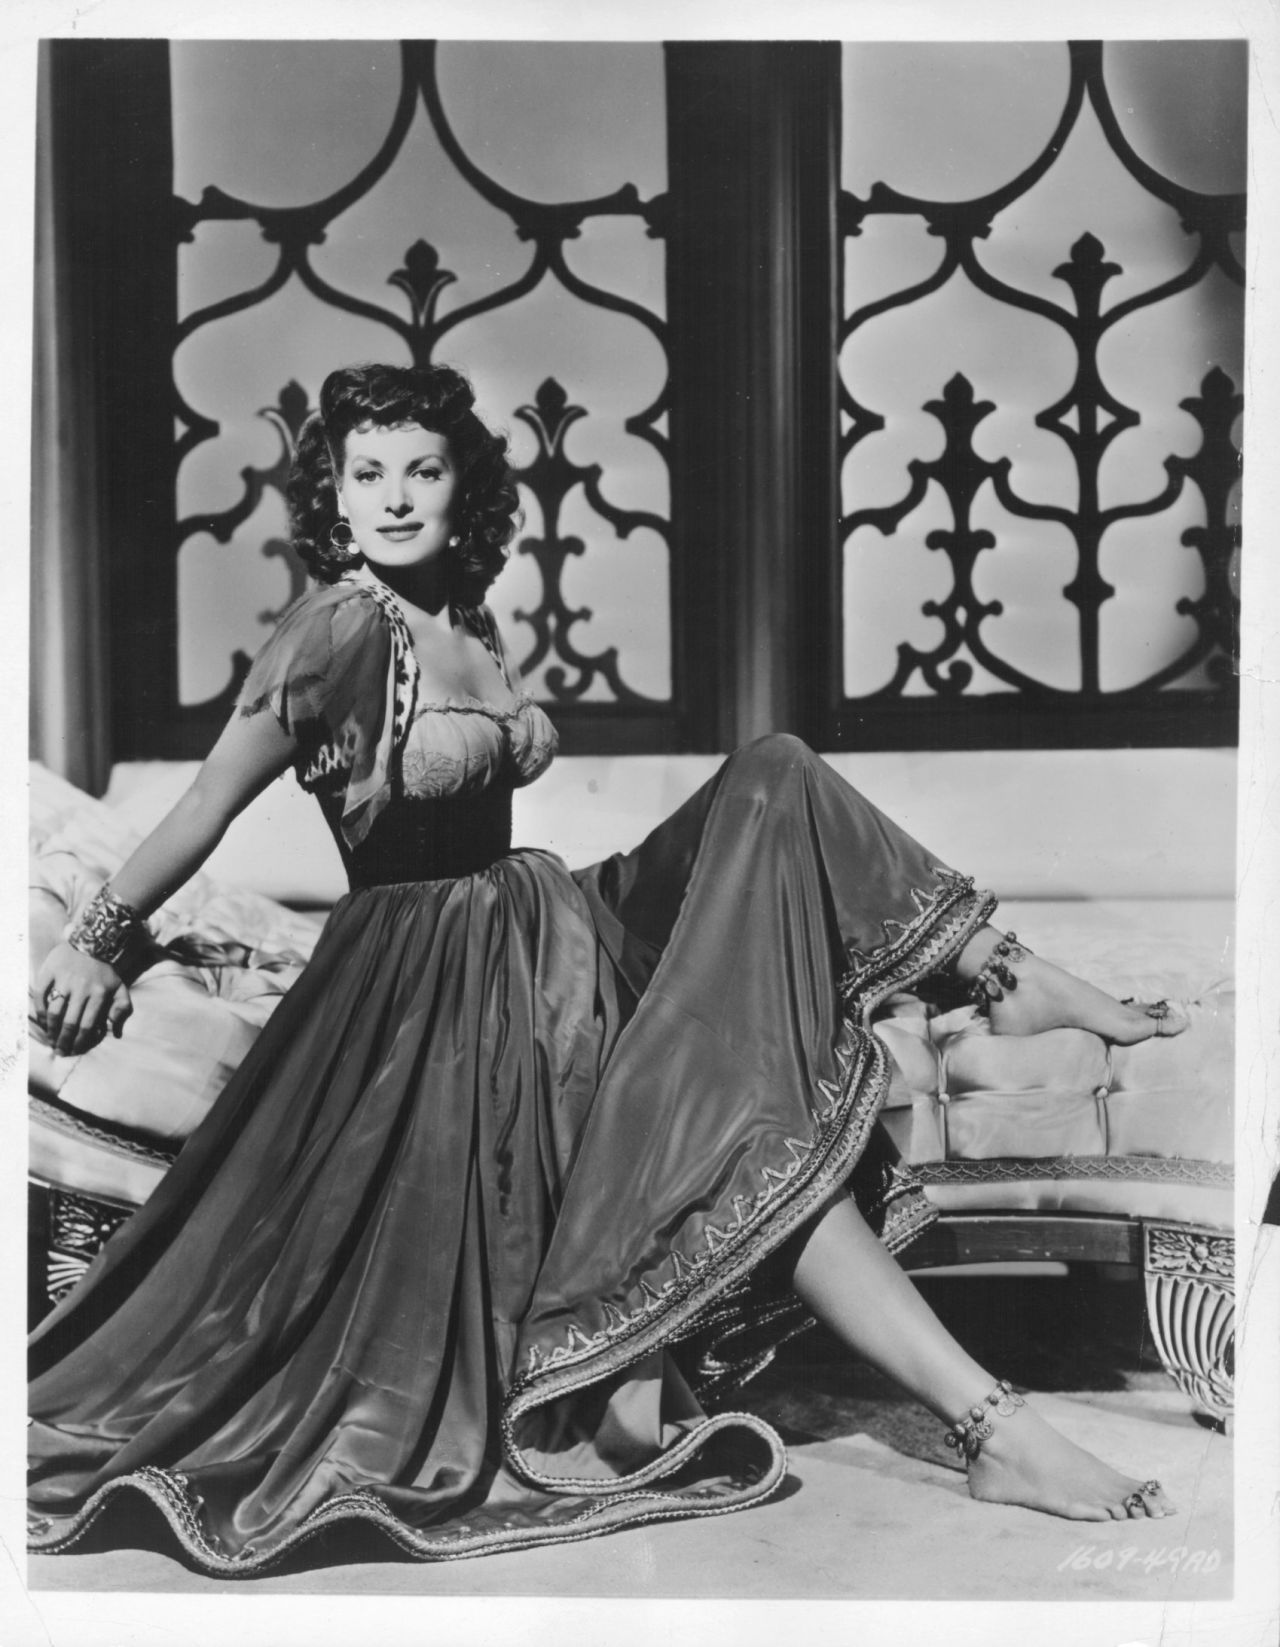 Portrait of O'Hara in costume, as she appeared in the movie "Bagdad," in 1949.